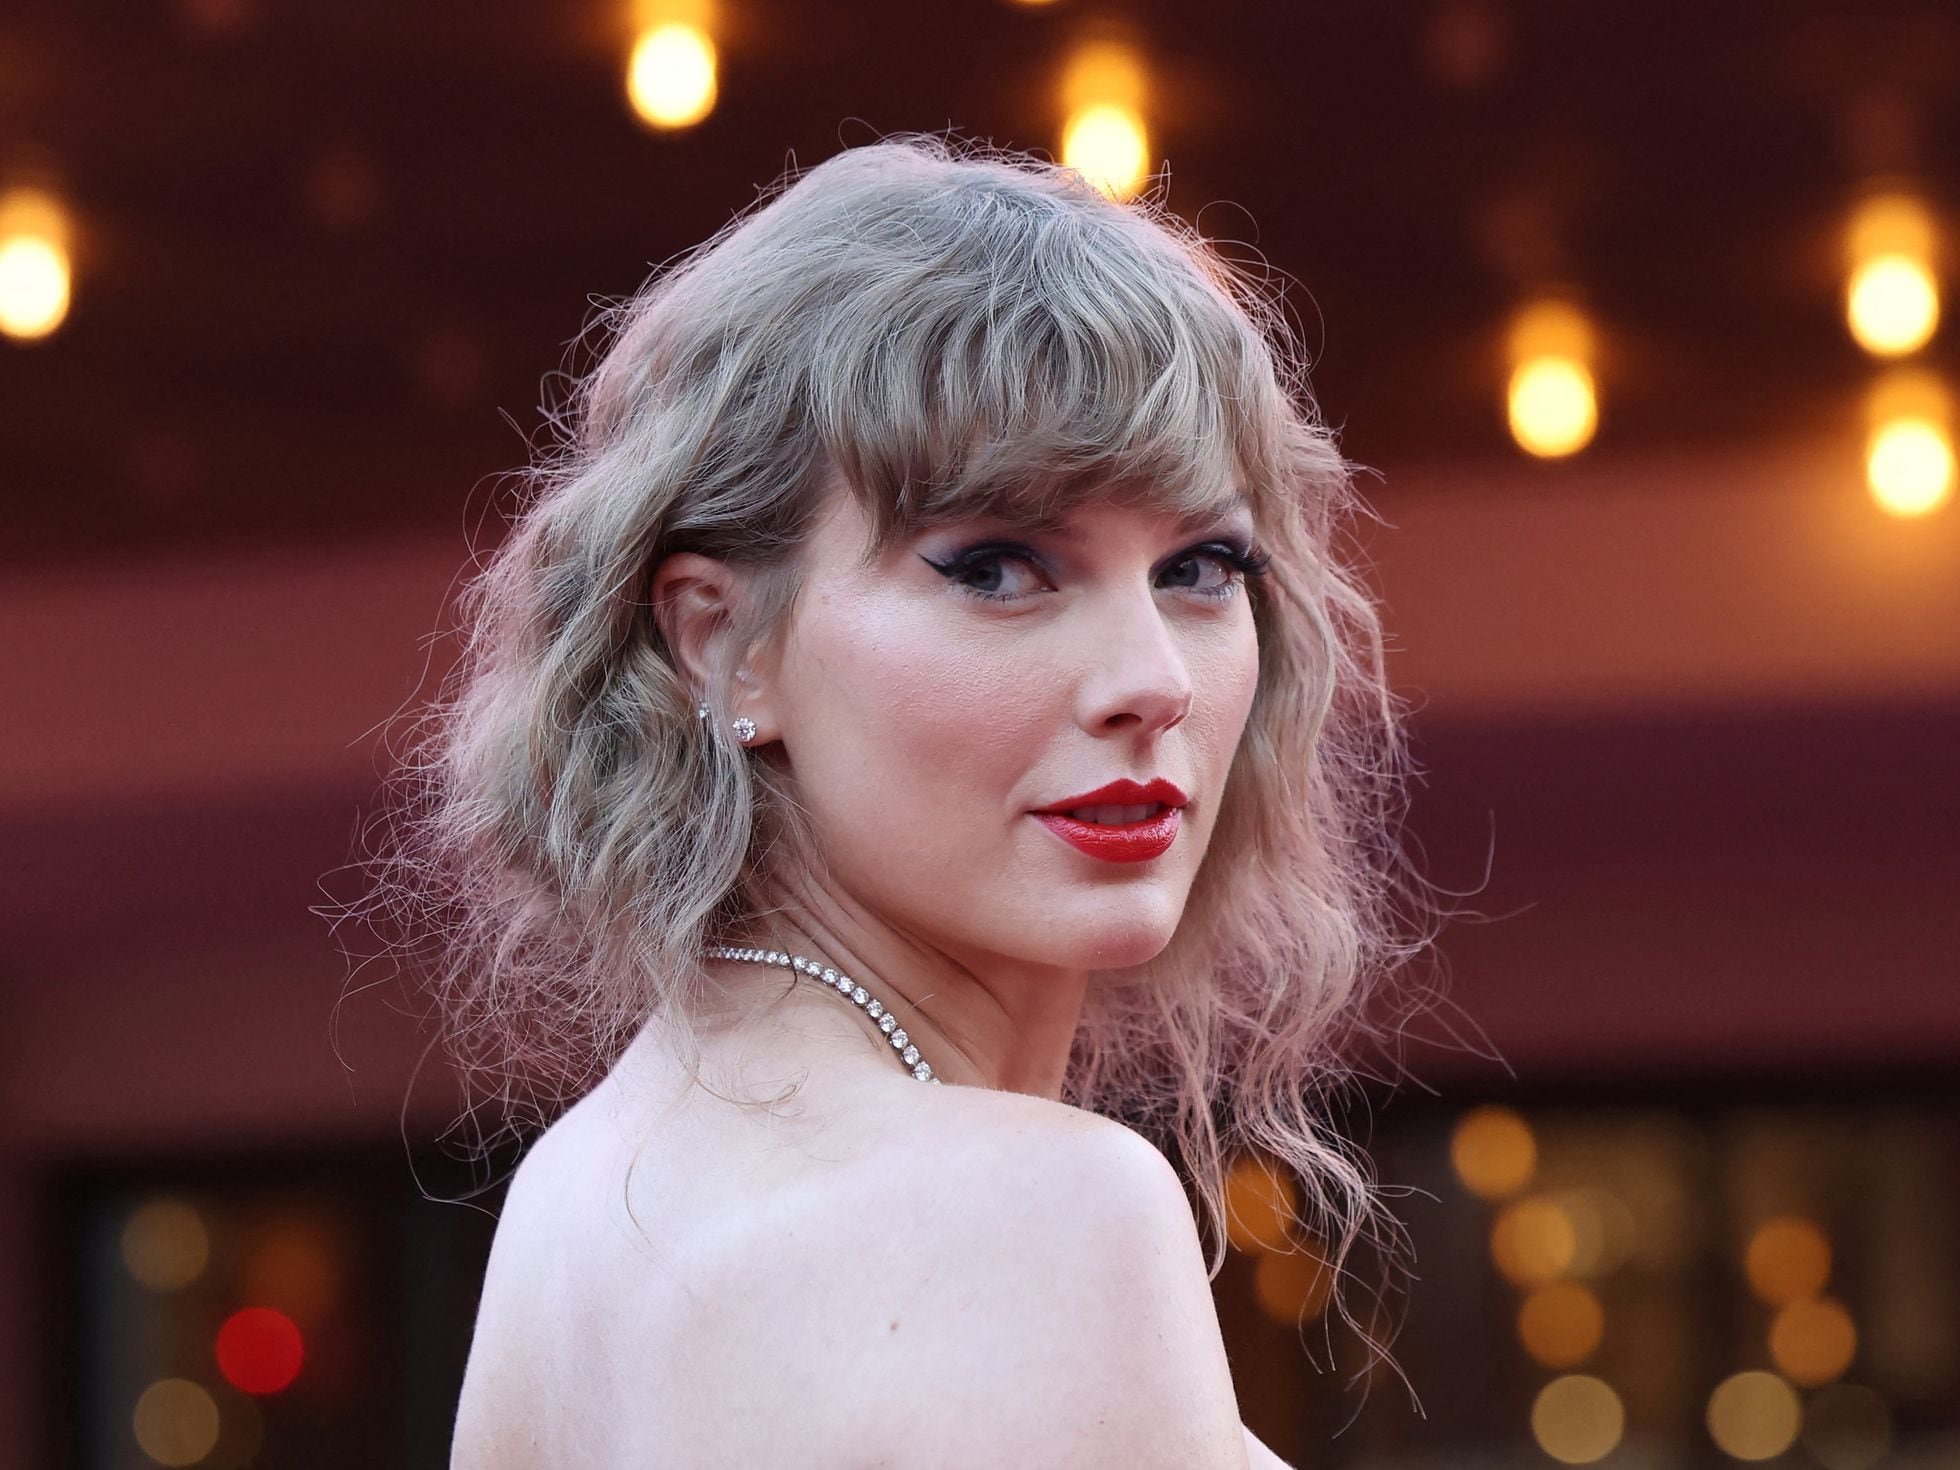 Good or bad boobs? Err, hang on, why are we voting on Taylor Swift's breasts ?